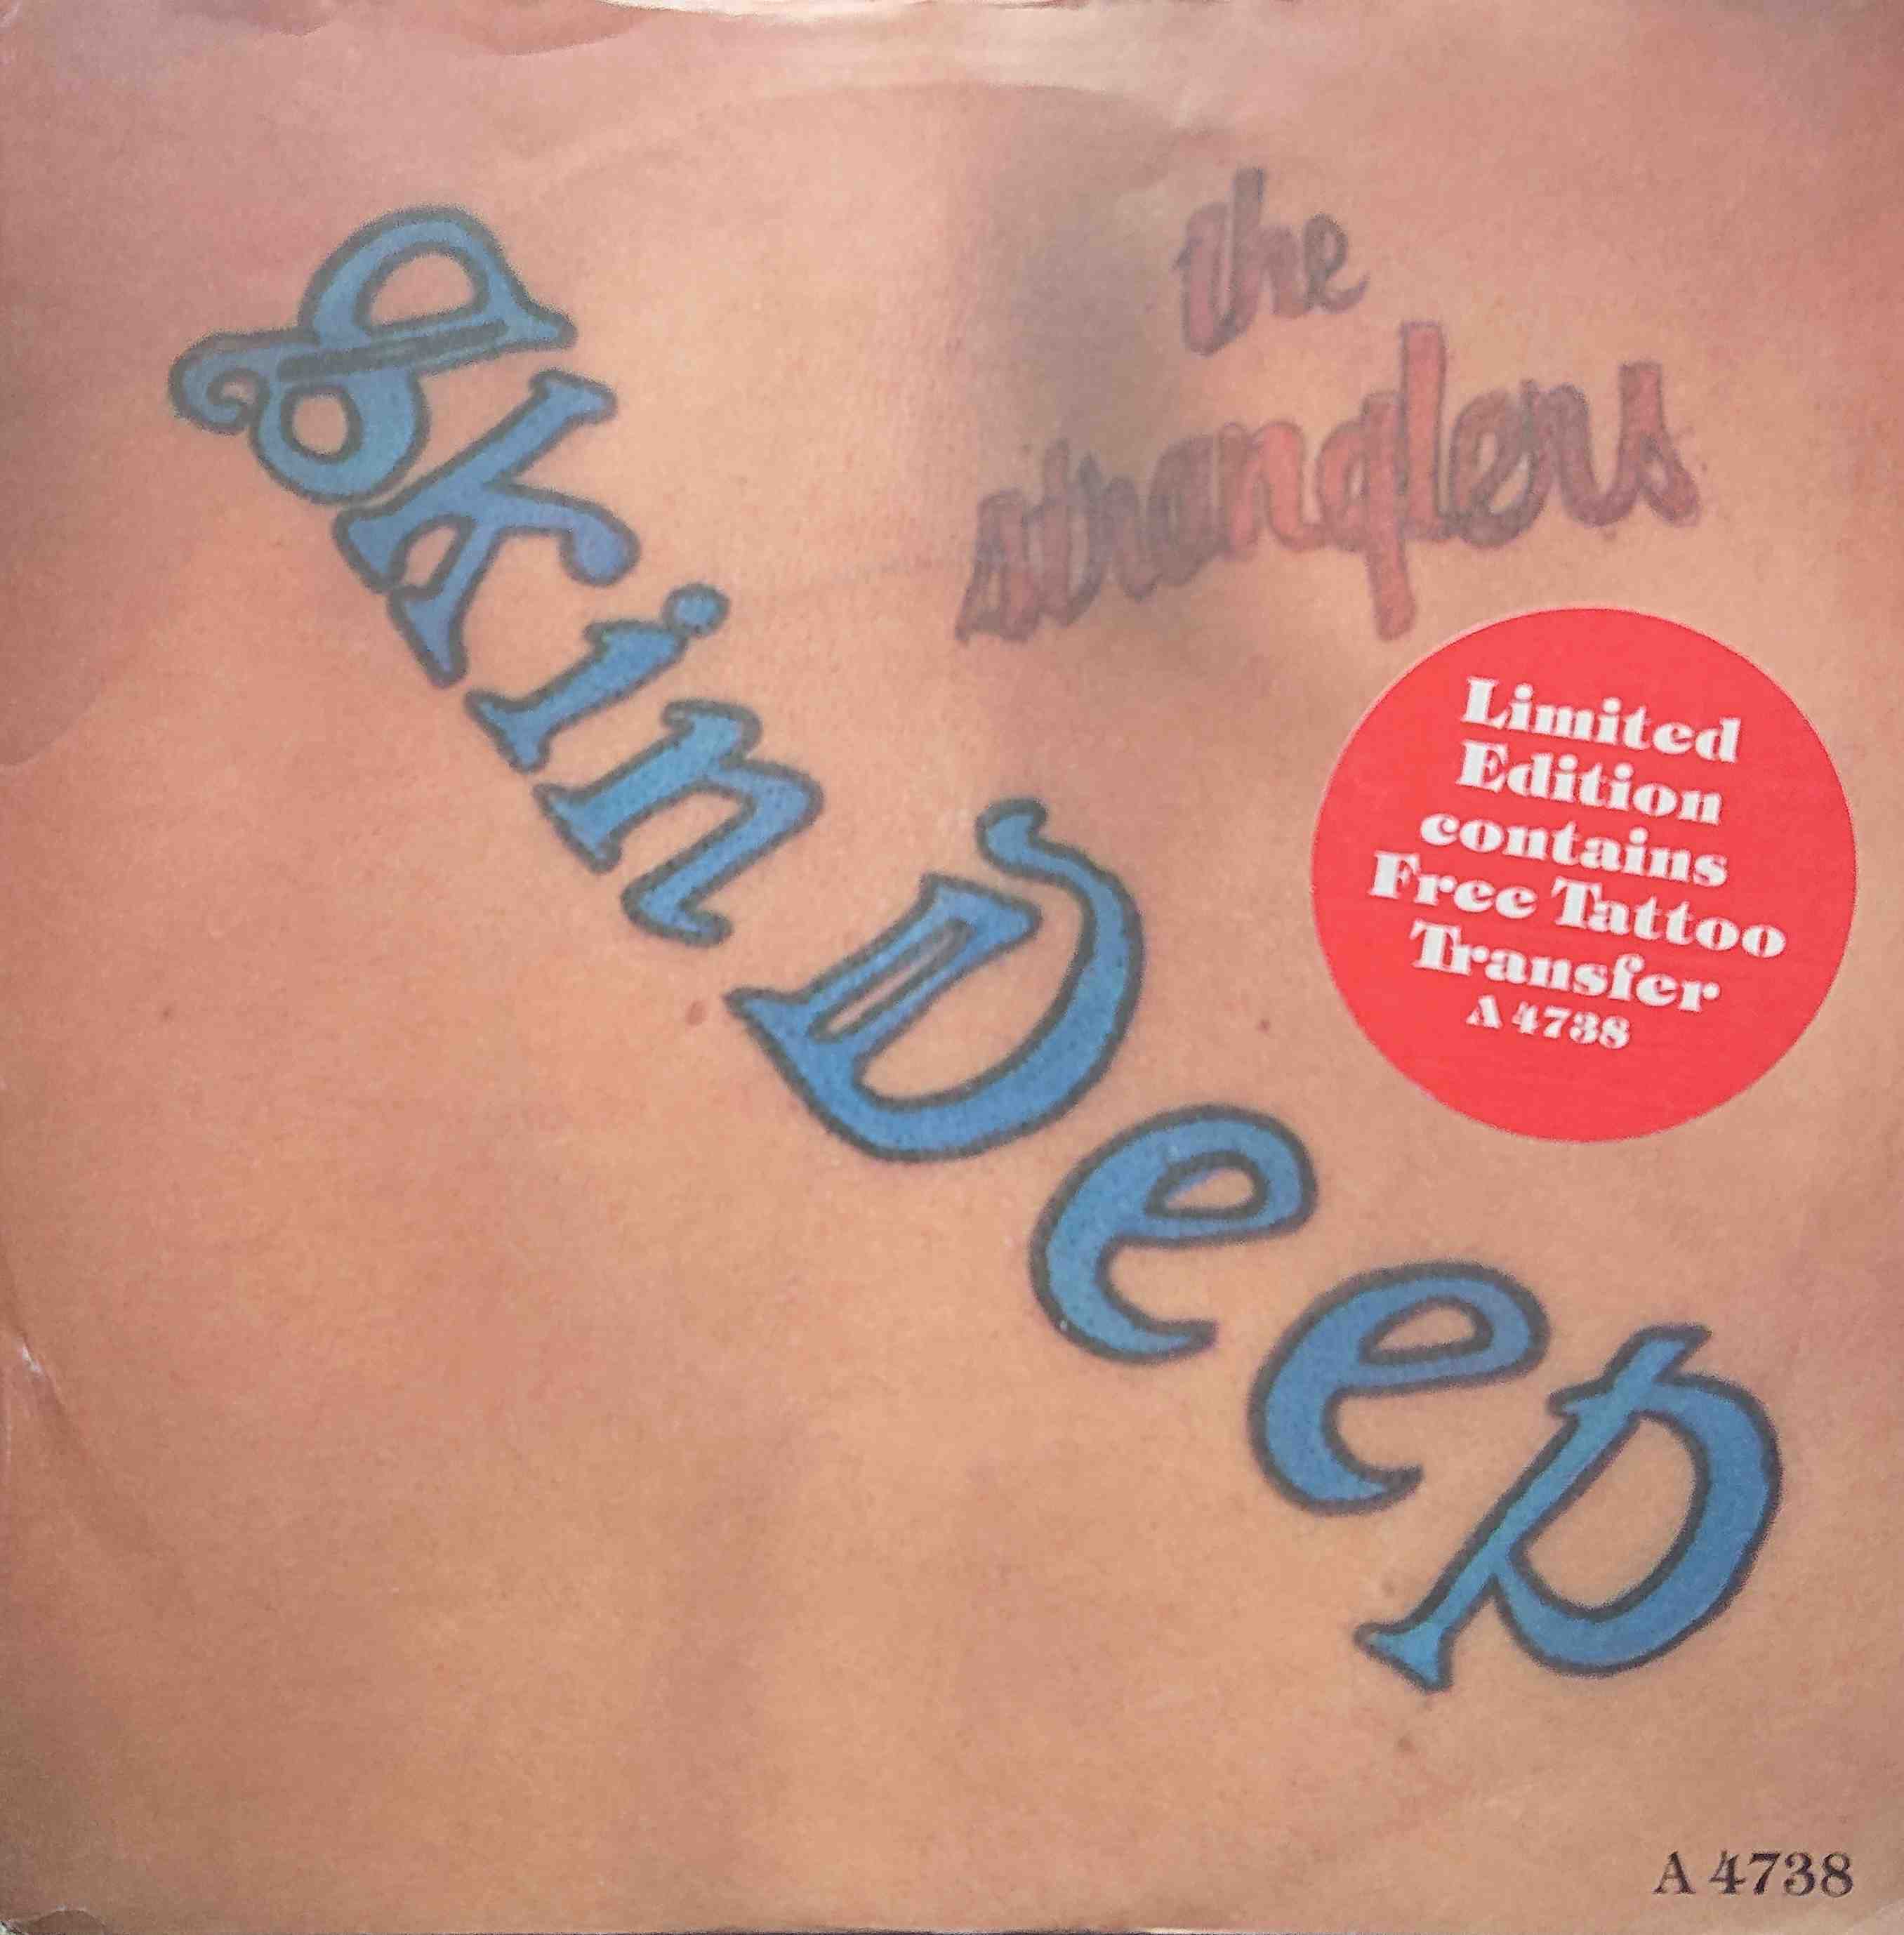 Picture of Skin deep by artist The Stranglers from The Stranglers singles